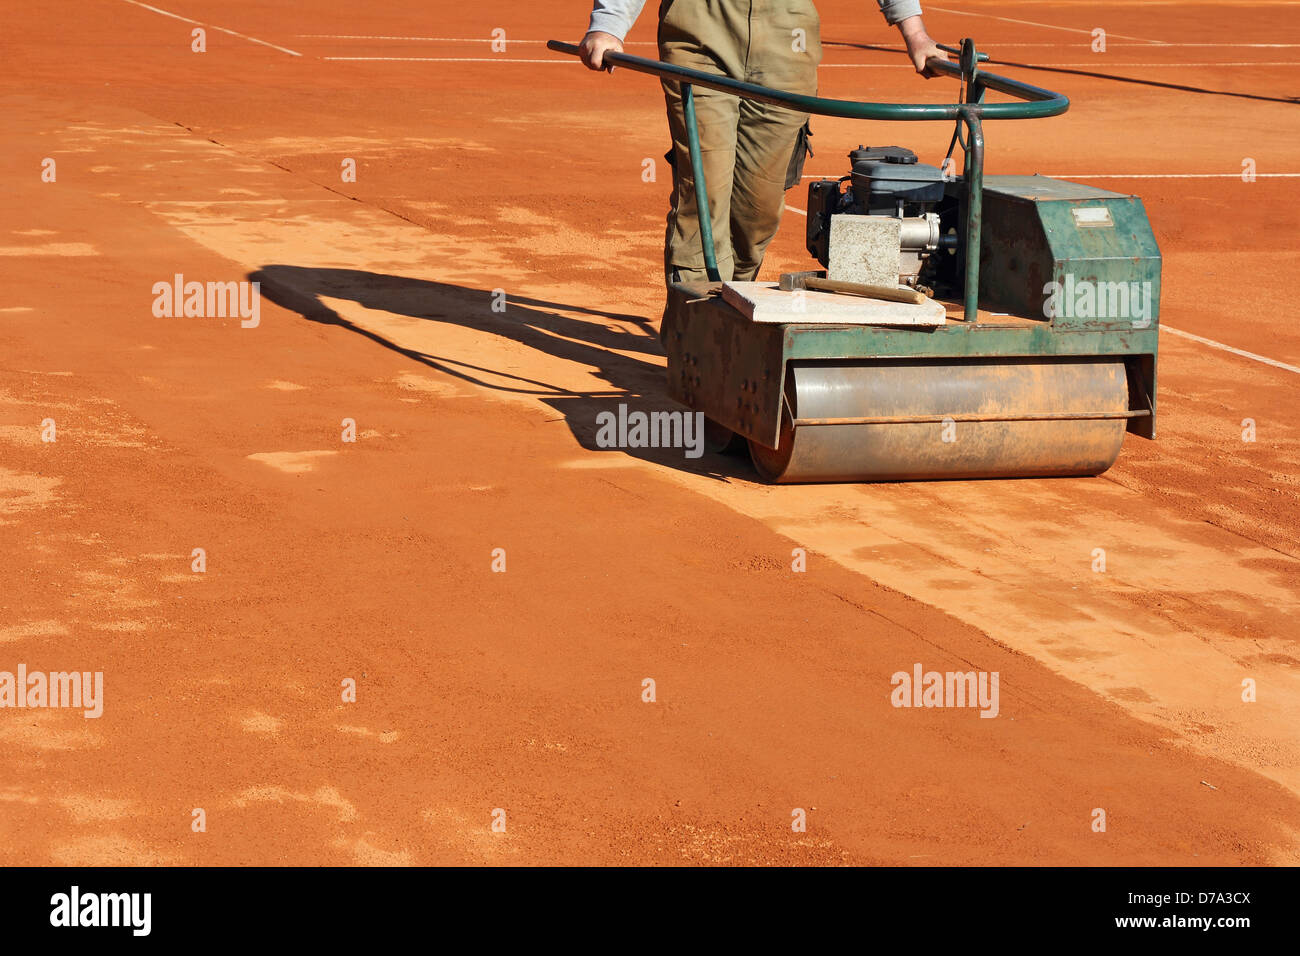 Worker with roller editing clay tennis court Stock Photo